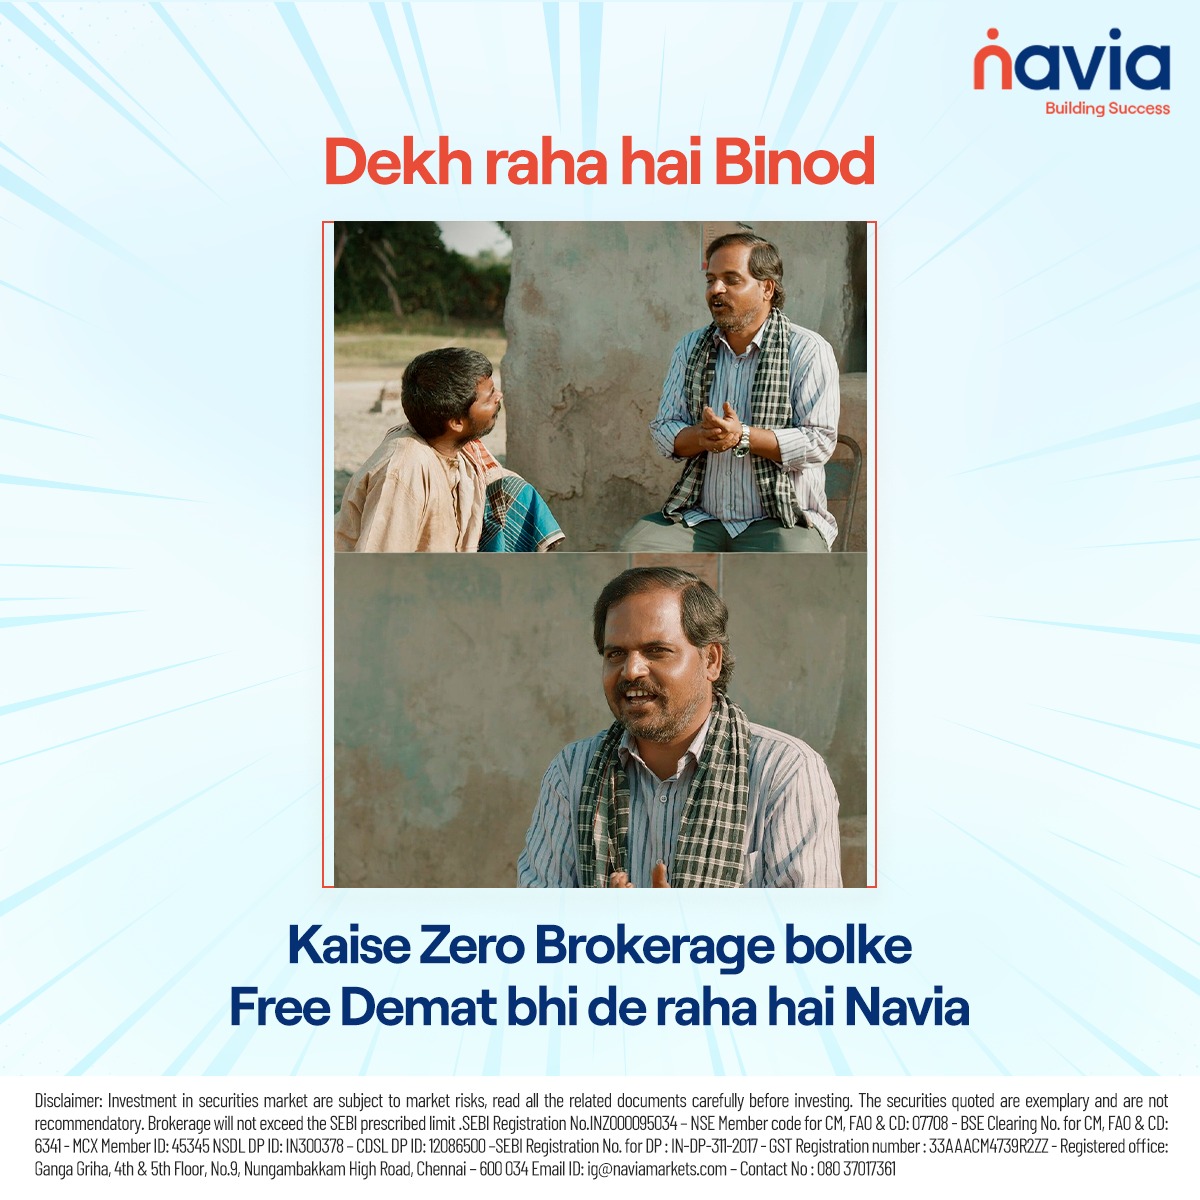 Not just zero brokerage, but free Demat as well! Join Navia and experience the difference.

#Navia #TrustedTradingPartner #TradeSmart #FinancialFreedom #InvestingJourney #StockMarket #Trading #WealthCreation #TargetAchieved #StockMarketSuccess #BuildingSuccessToge #ZeroBrokerage